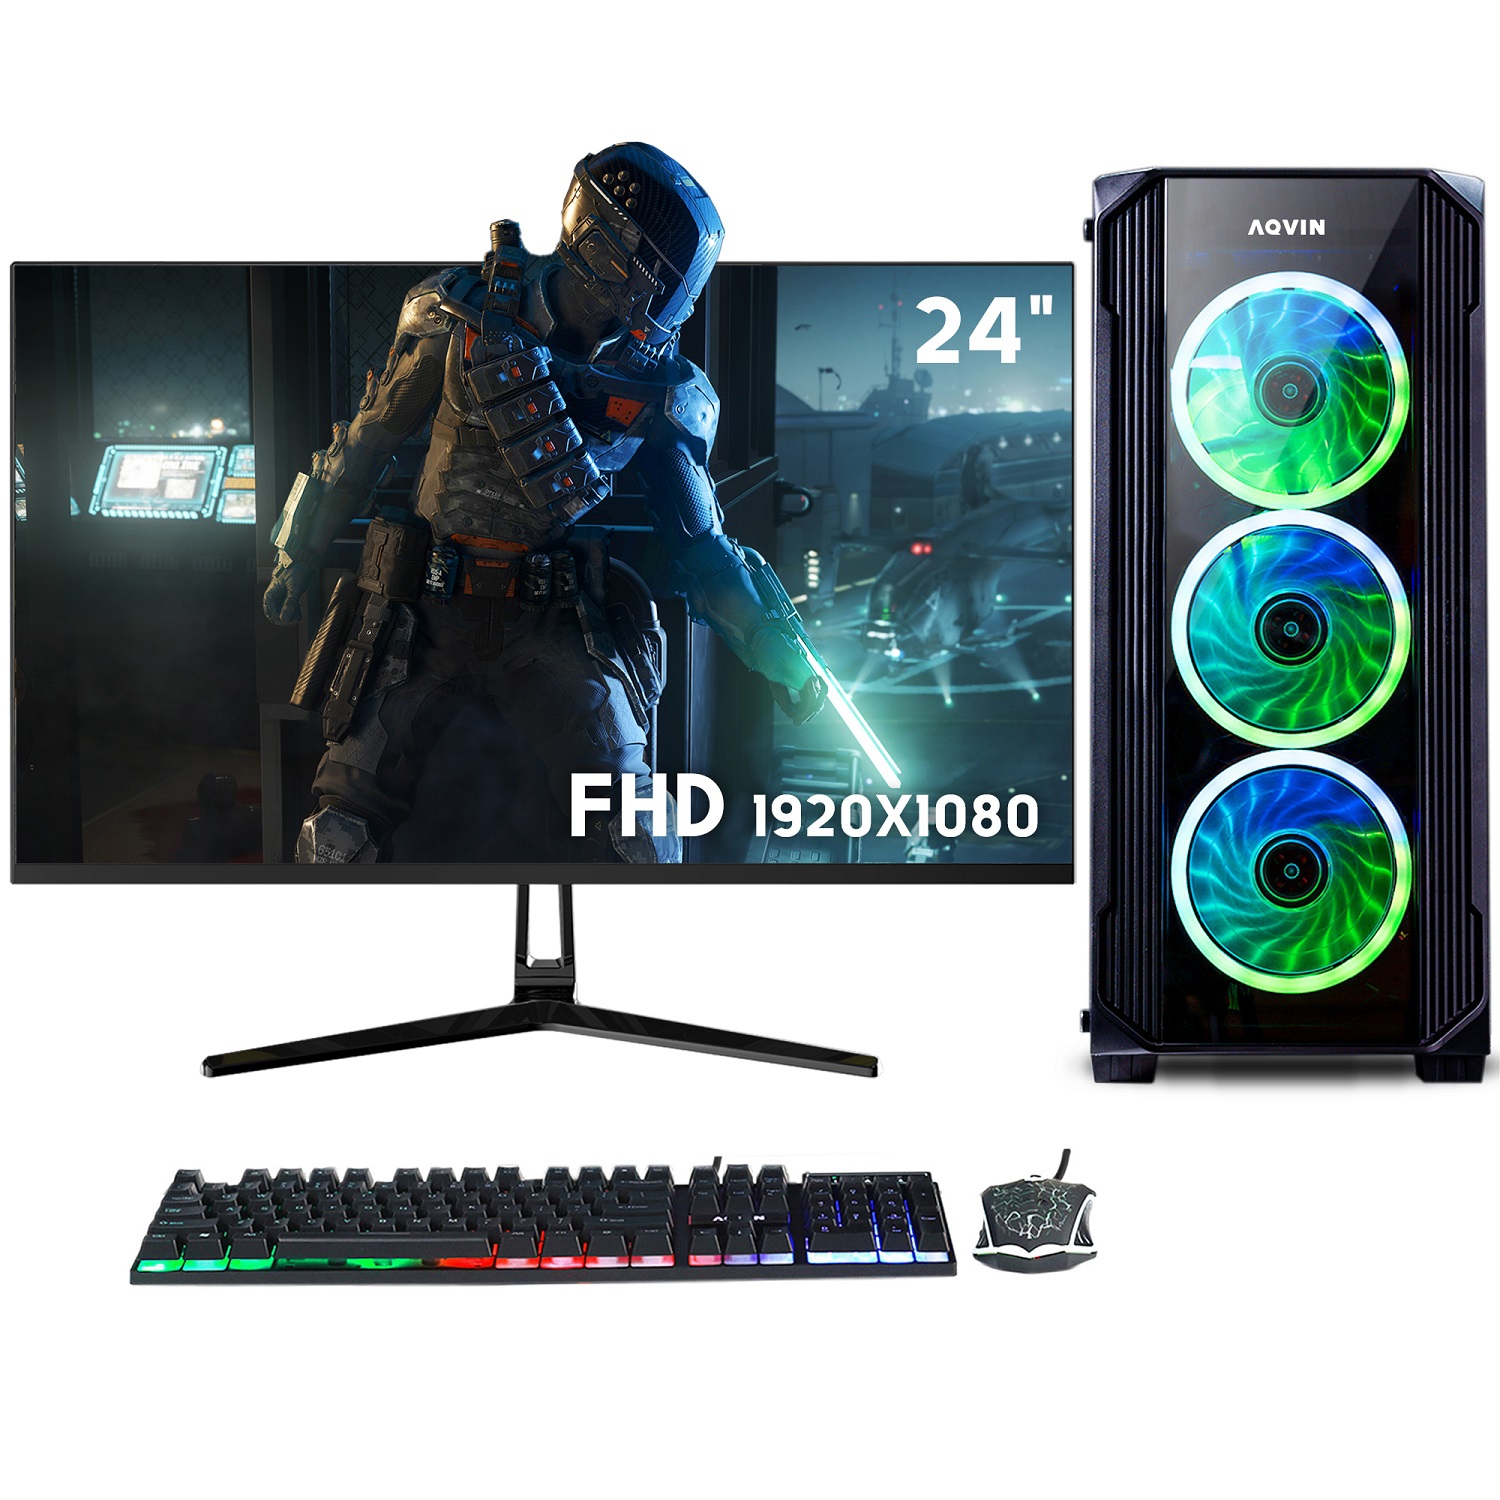 AQVIN Gaming PC Desktop Computer Tower with 24-inch Curved Gaming Monitor - Intel Core i7 up to 4.0Ghz 1TB SSD 32GB DDR4 RAM RX 580 8GB HDMI RGB Keyboard Mouse Windows 10 Pro Wifi